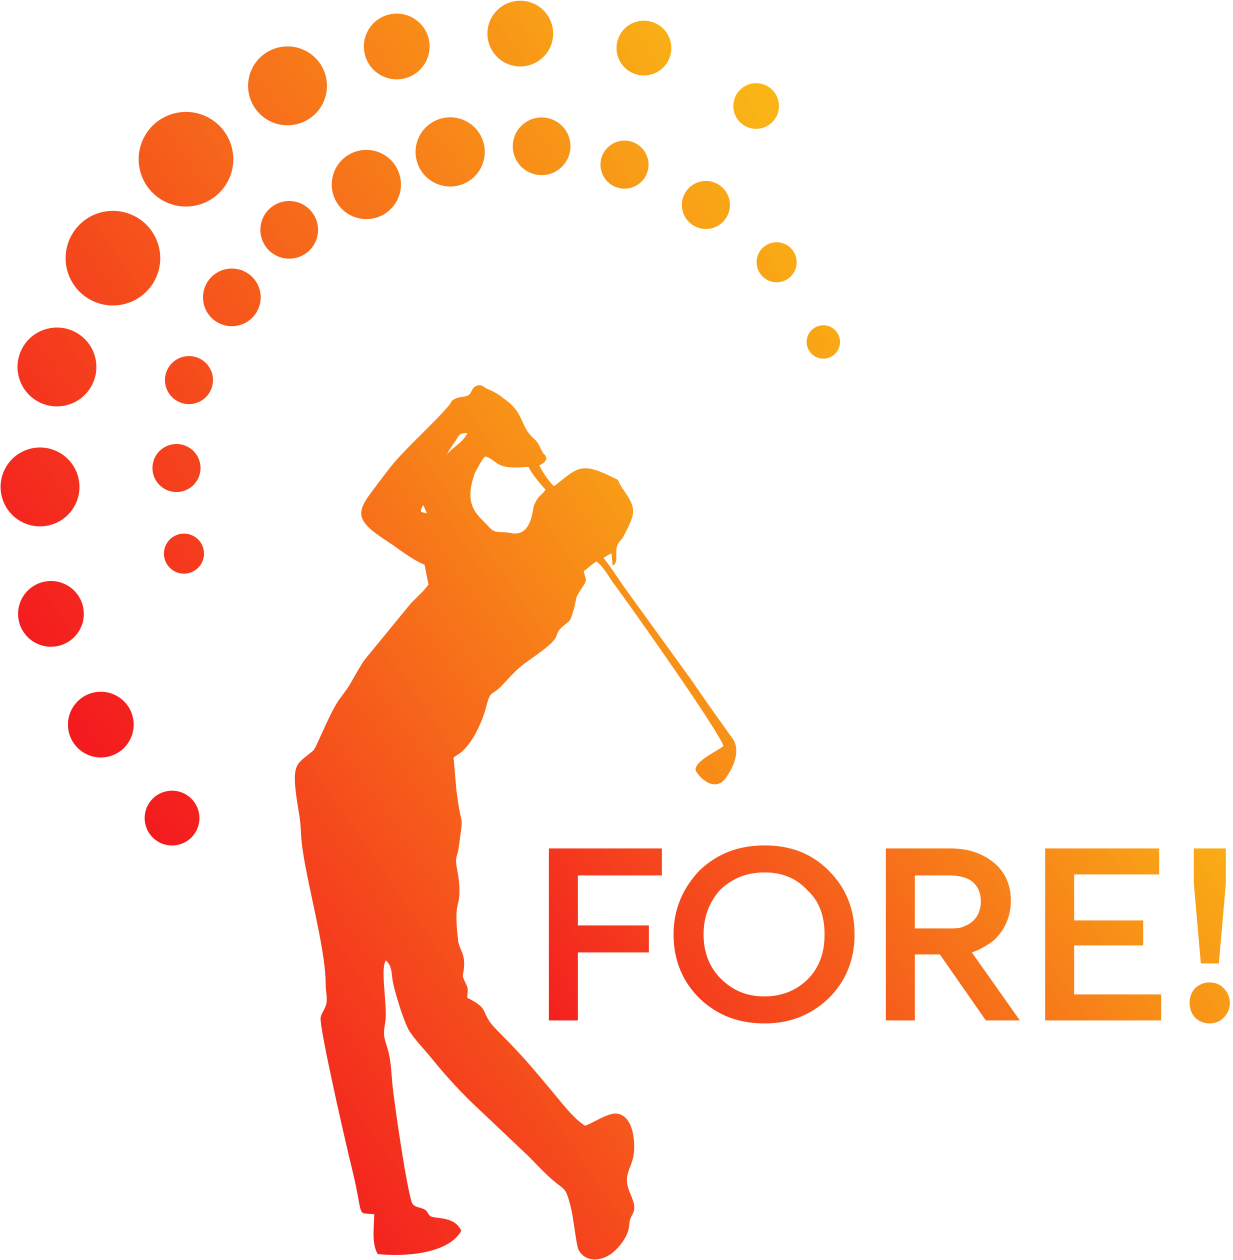 FORE!